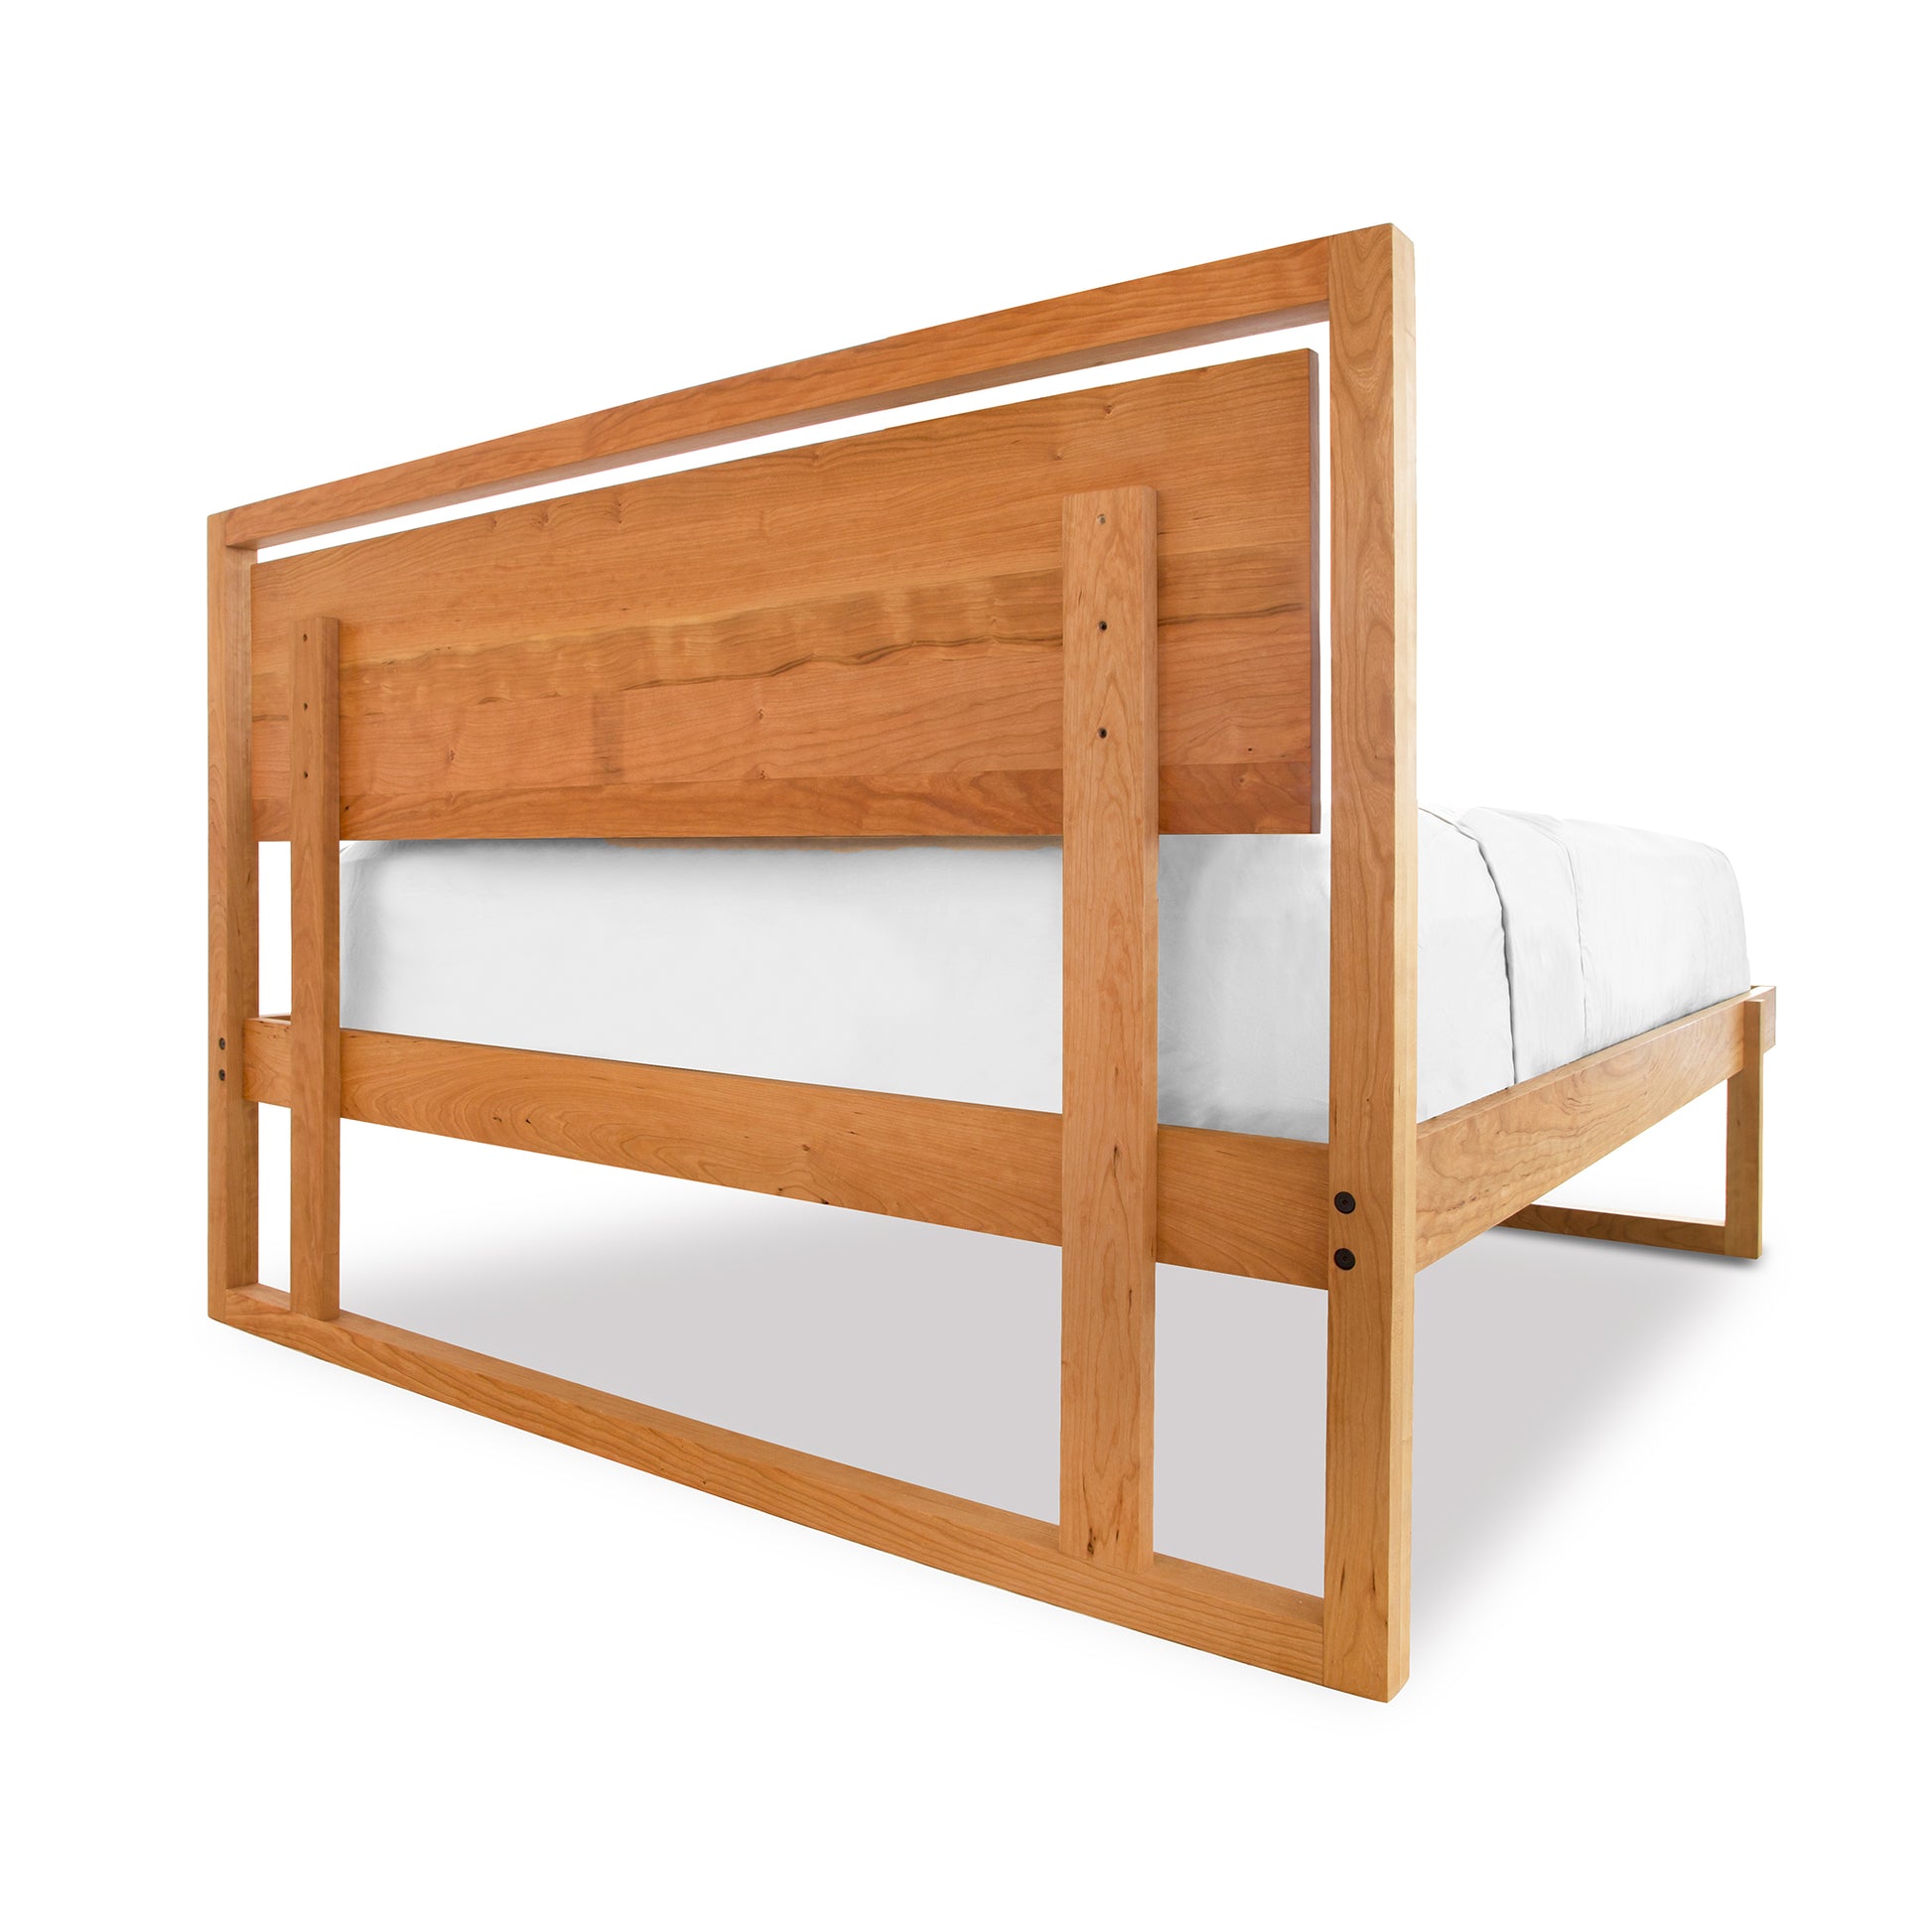 A Vermont Furniture Designs Pendant Bed with a white sheet on it.